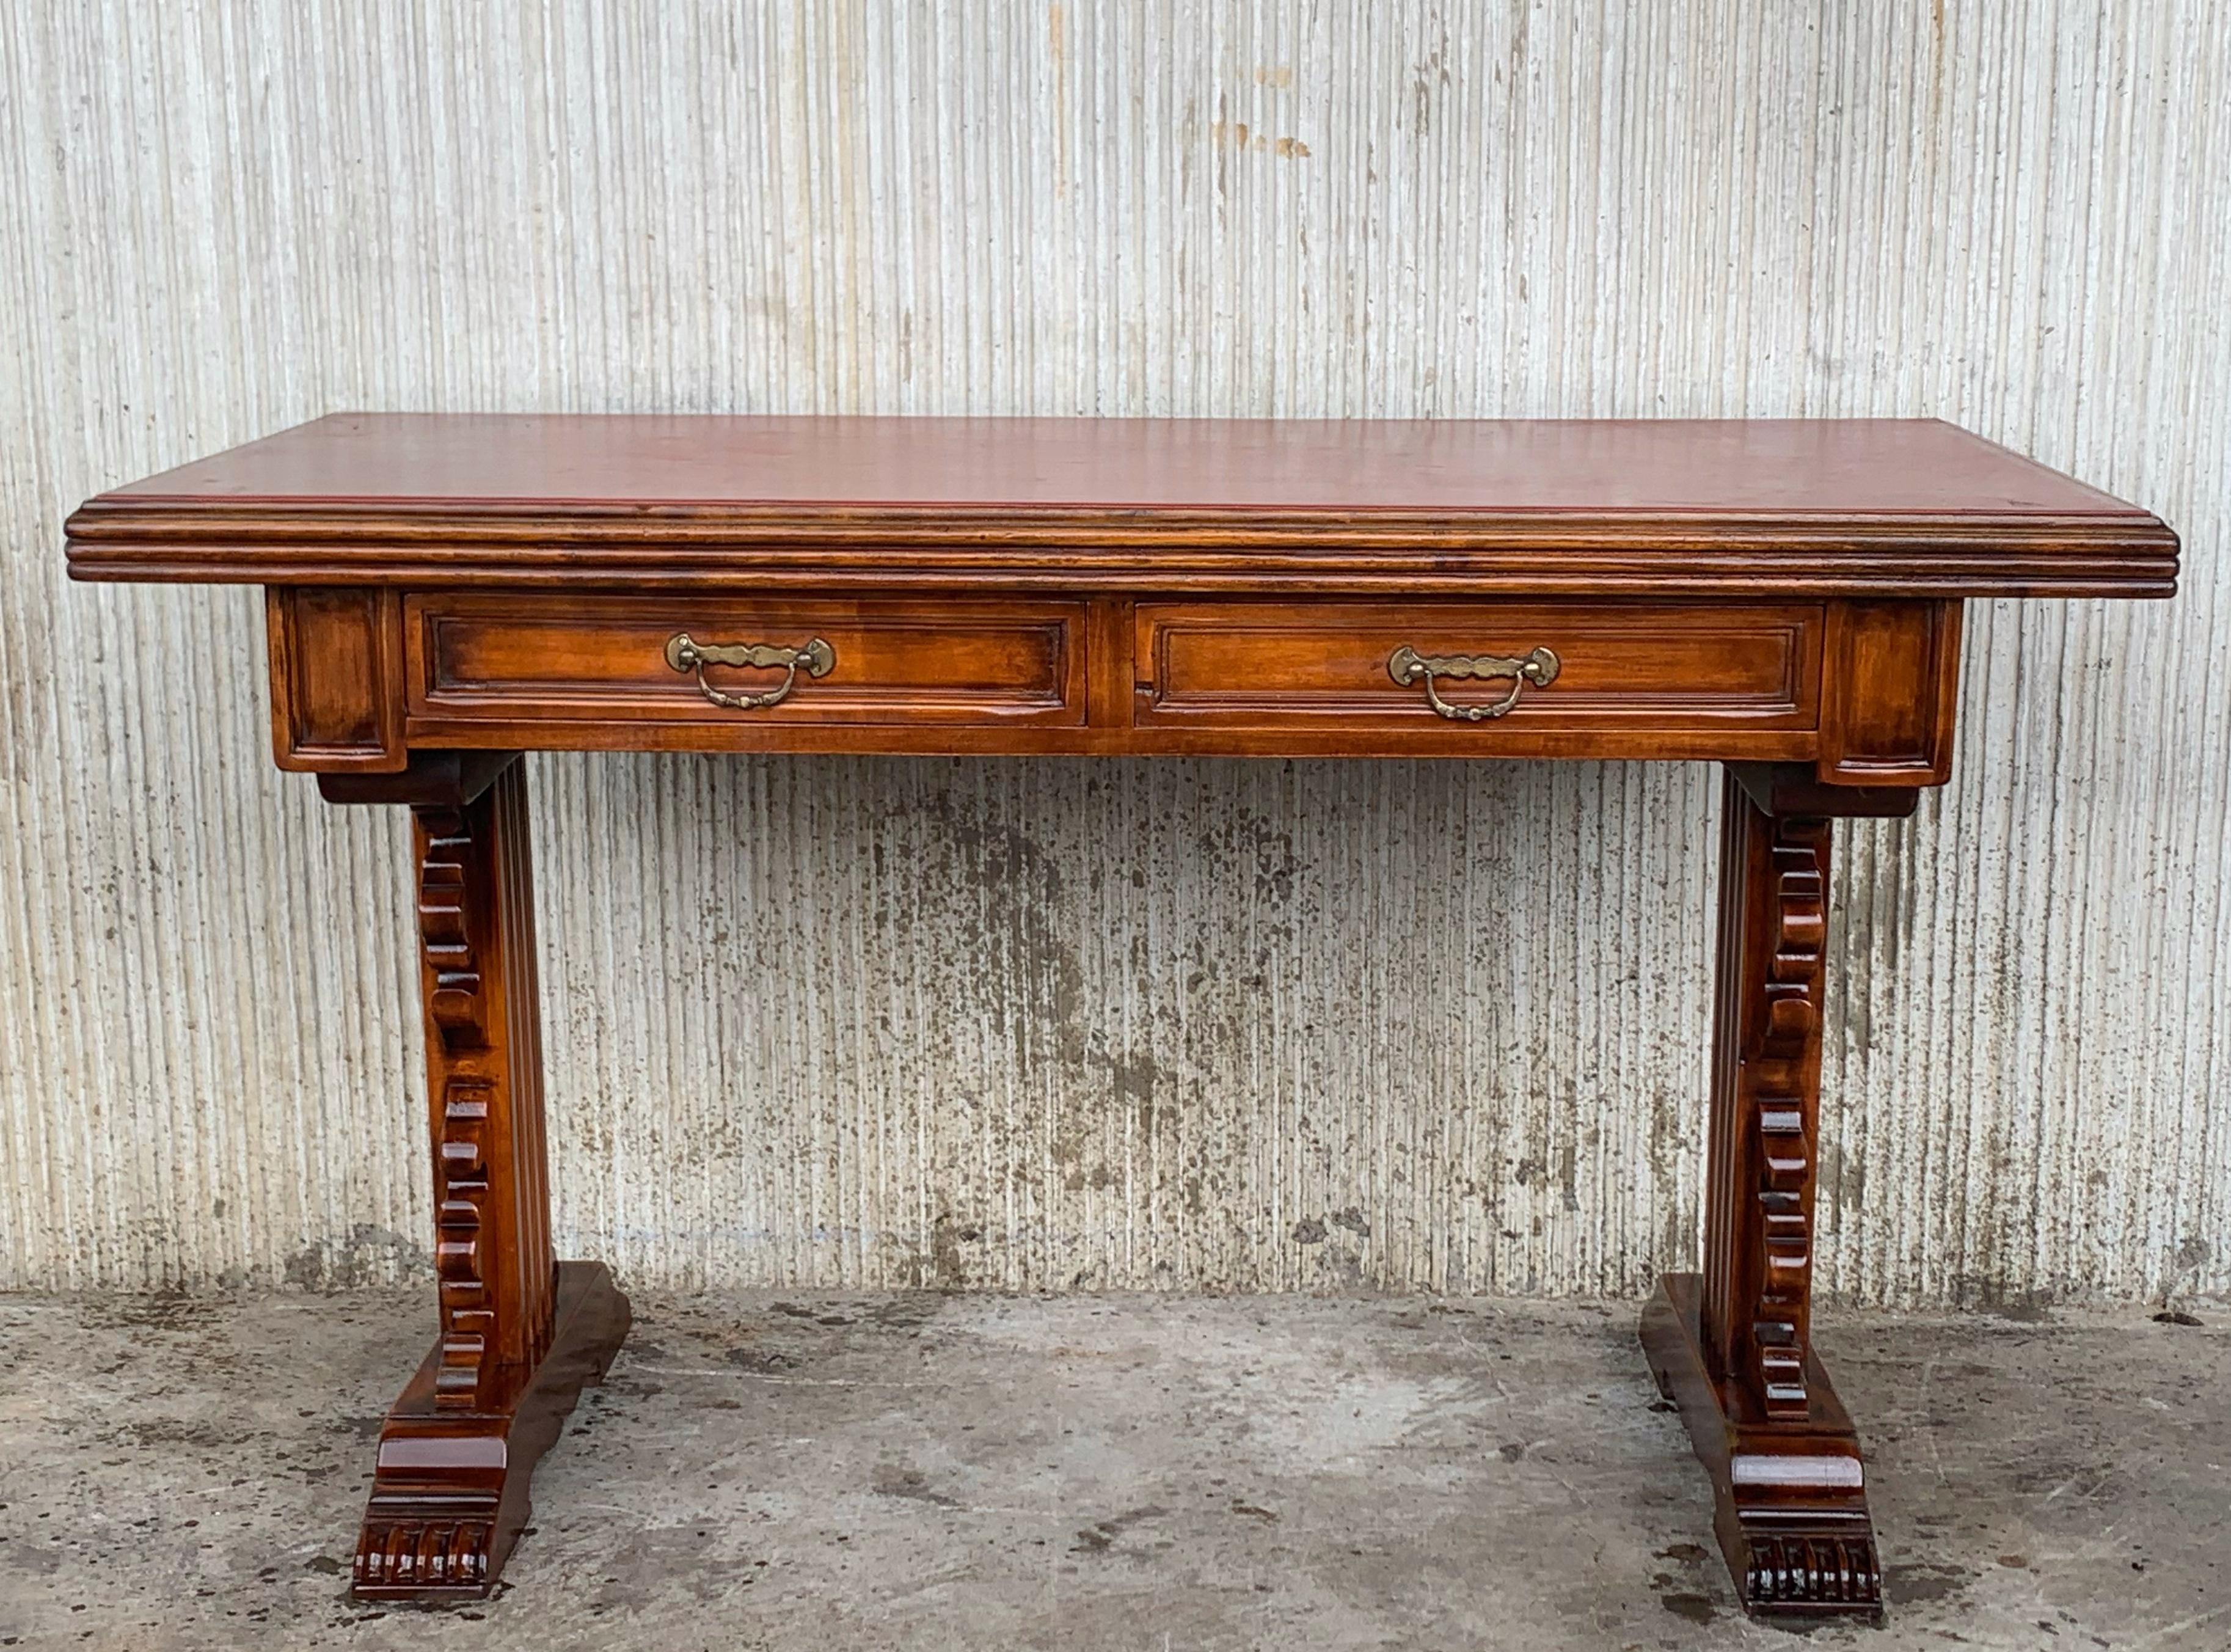 Spanish colonial desk or console table with two drawers signed by Valentí
This piece has a two-pedestal legs with an awesome carved. The top has a red leather.